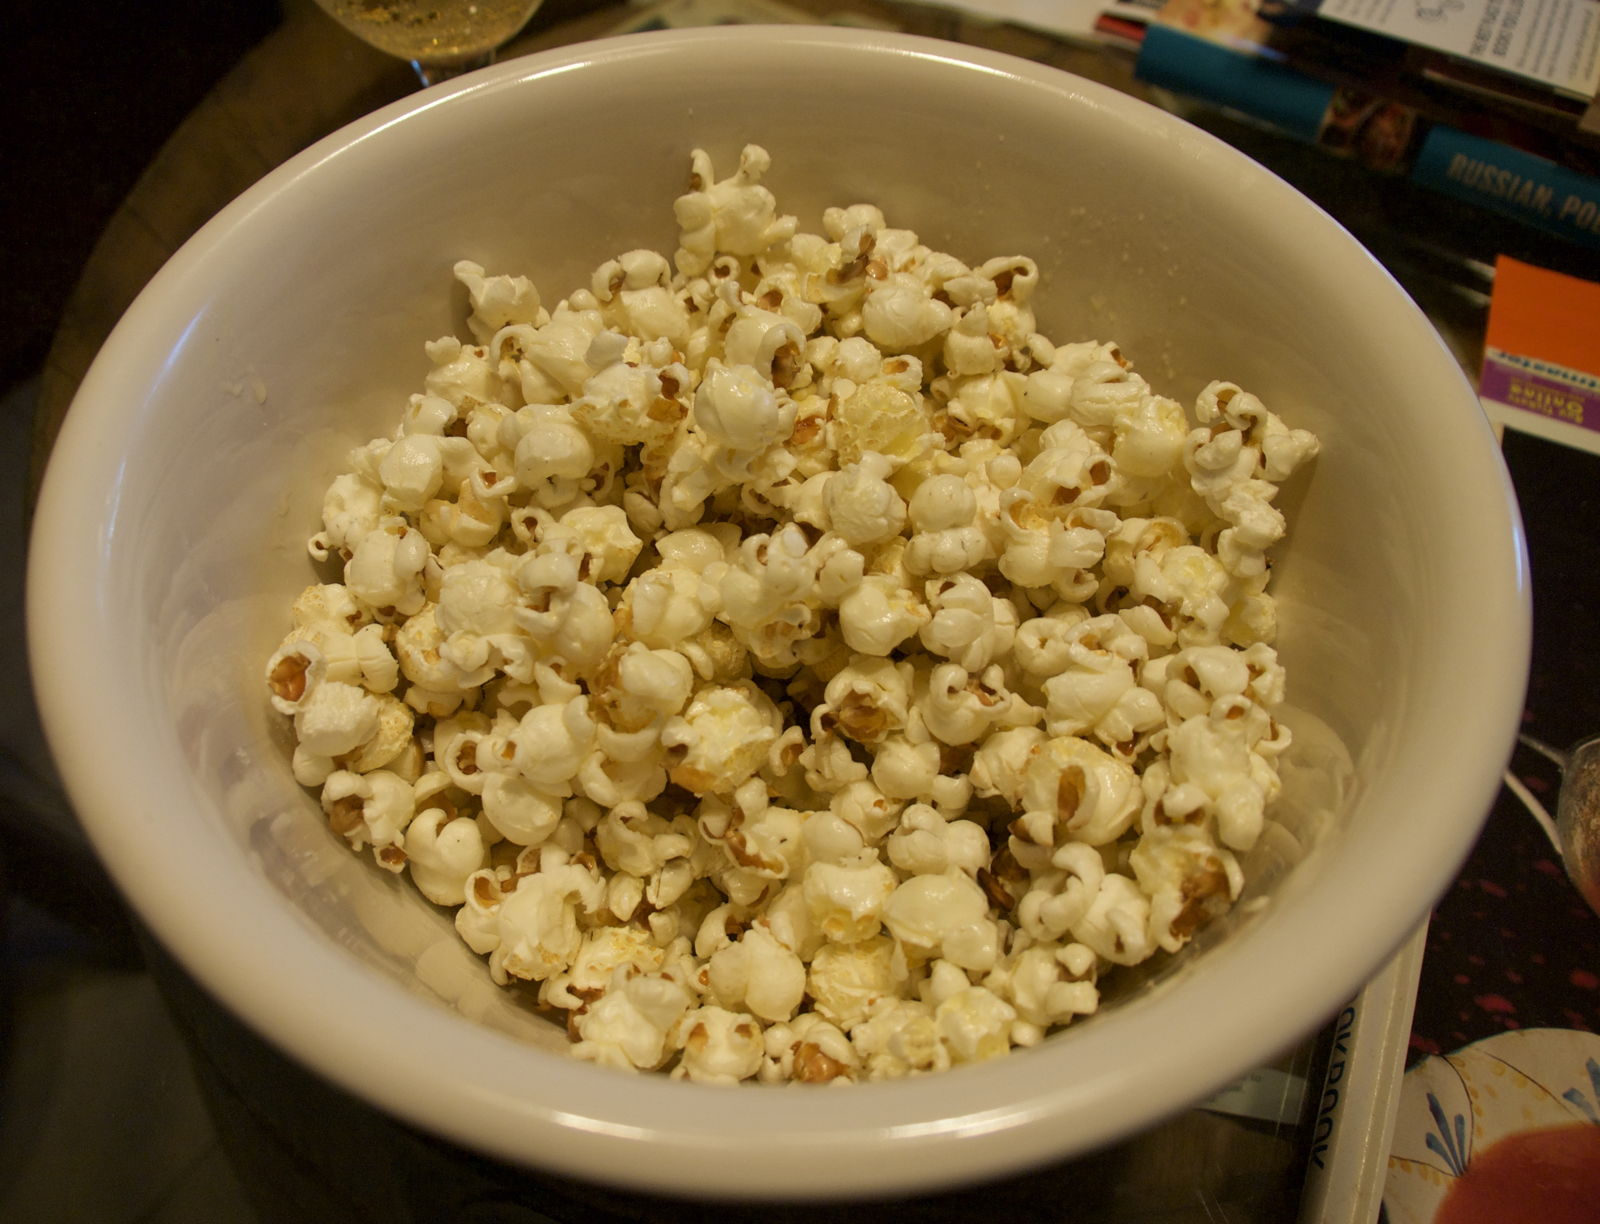 Buttered popcorn: Buttered, salted popcorn in a bowl.; popcorn; butter